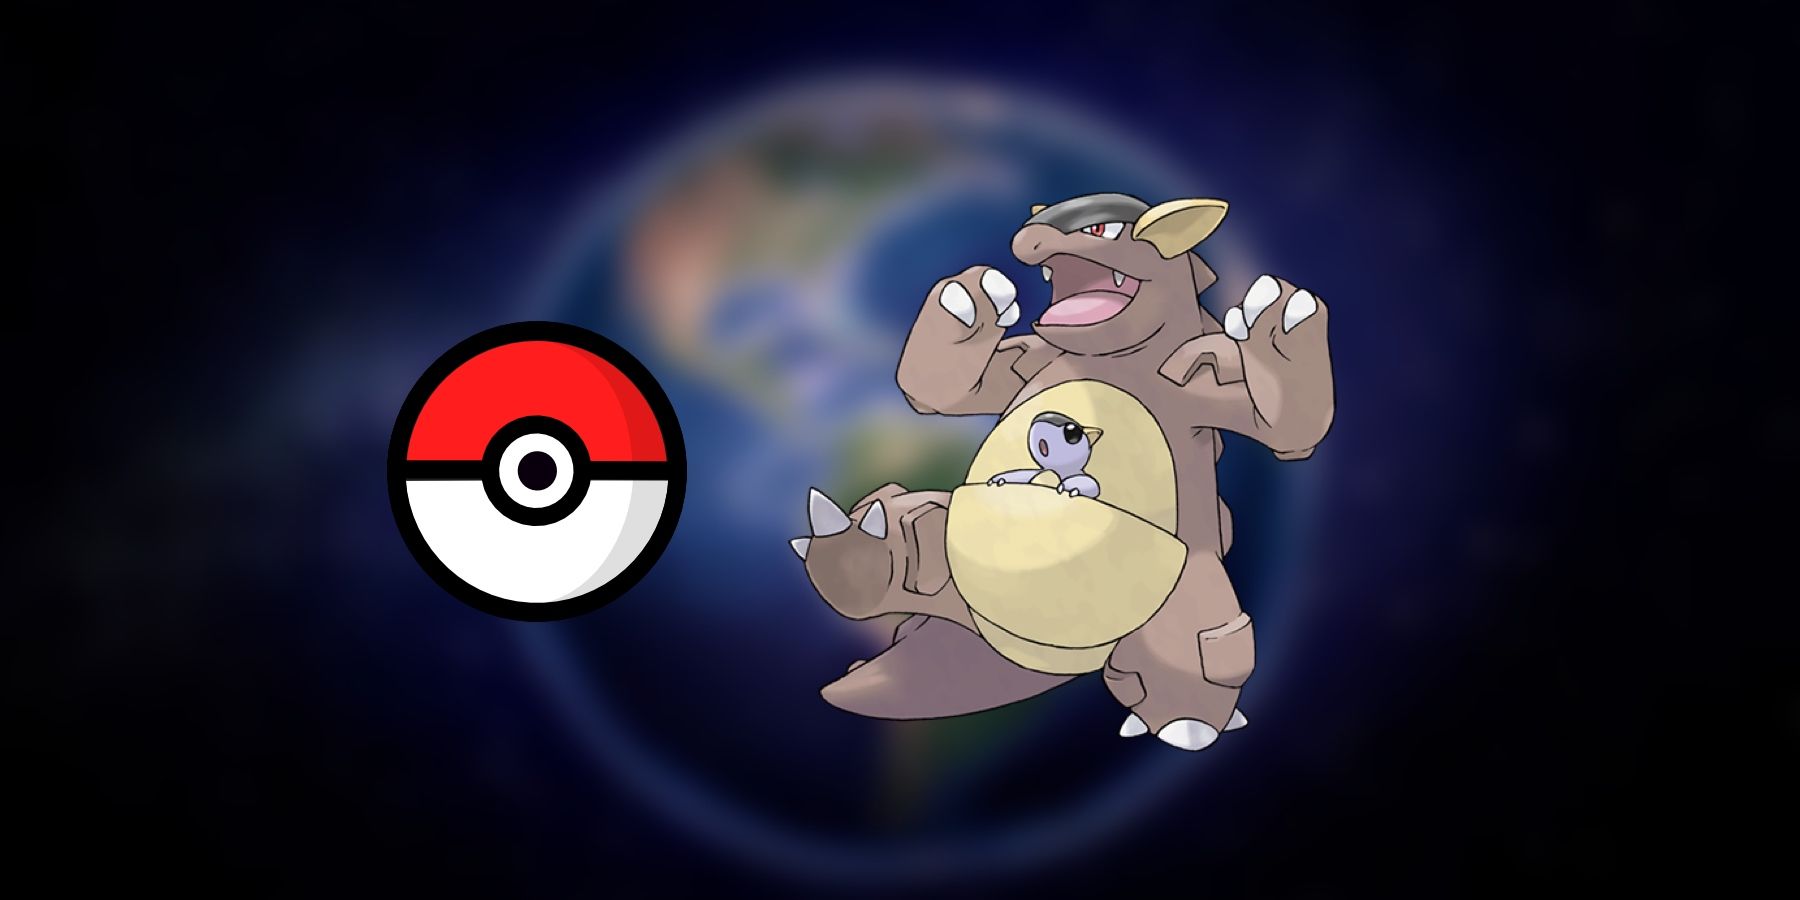 How to Get Kangaskhan in Pokémon GO in Your Country